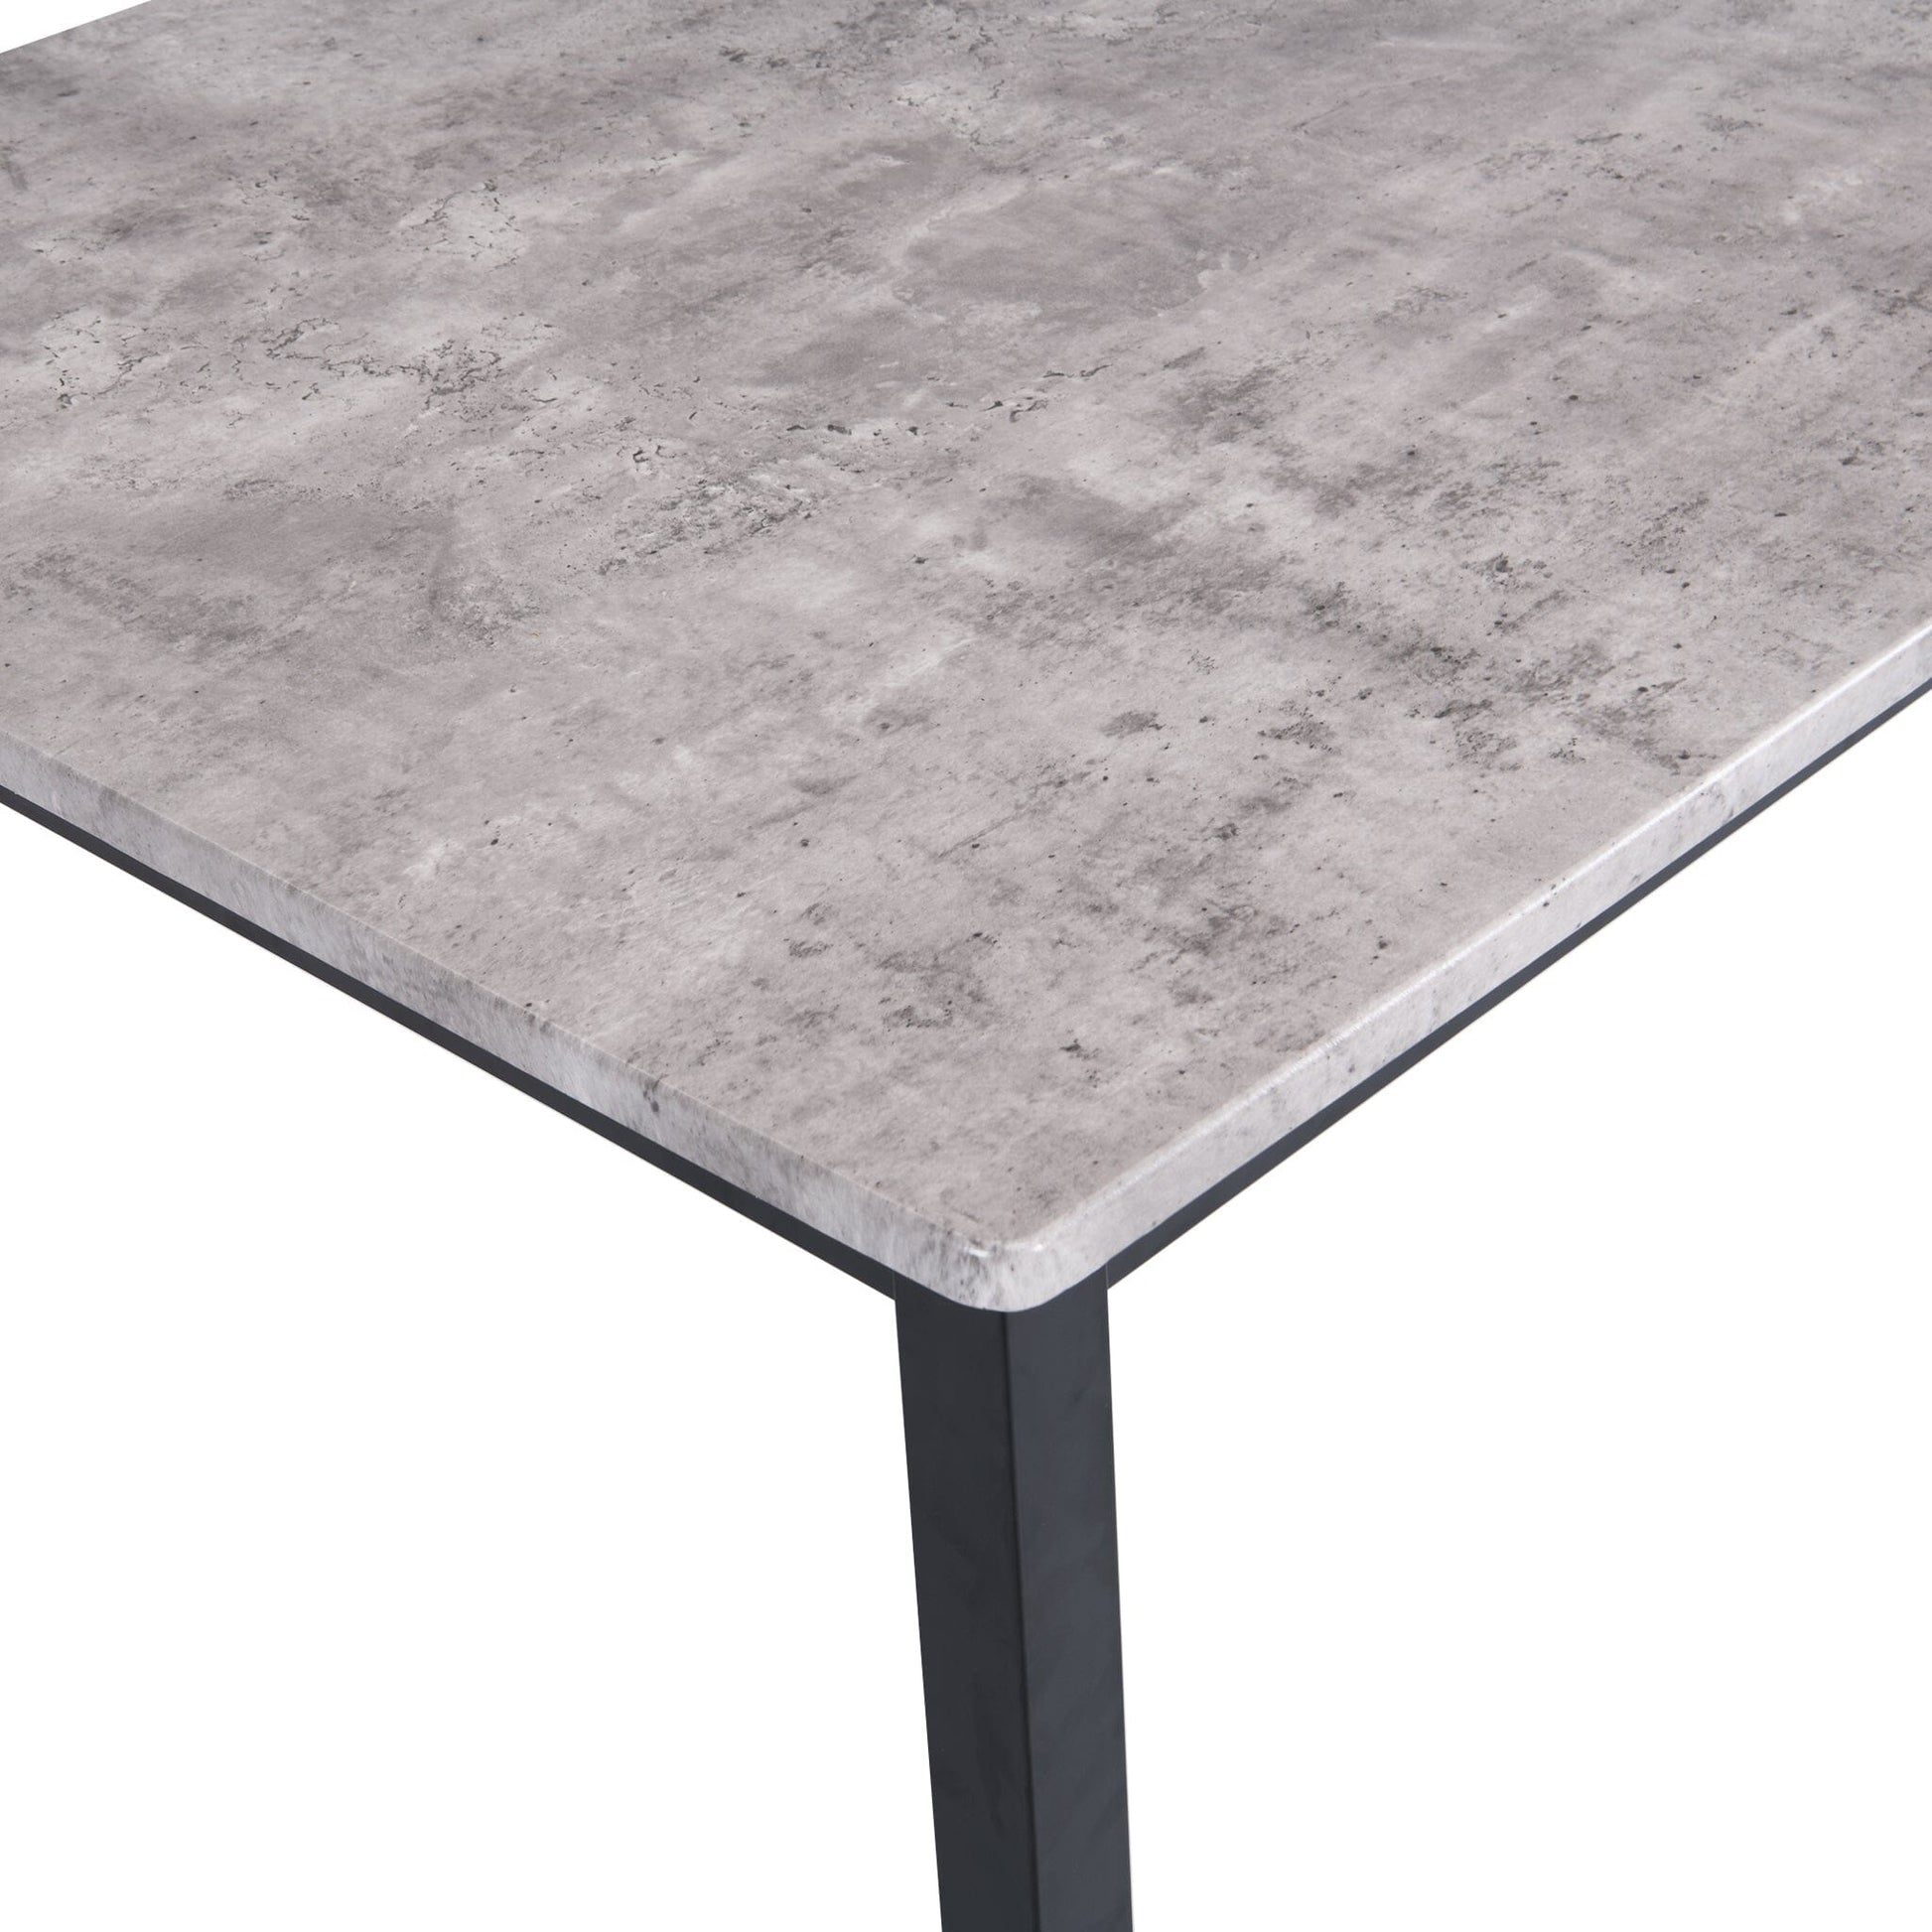 Milo Concrete Table - 6 Seater - Ellis Grey and Black Chairs